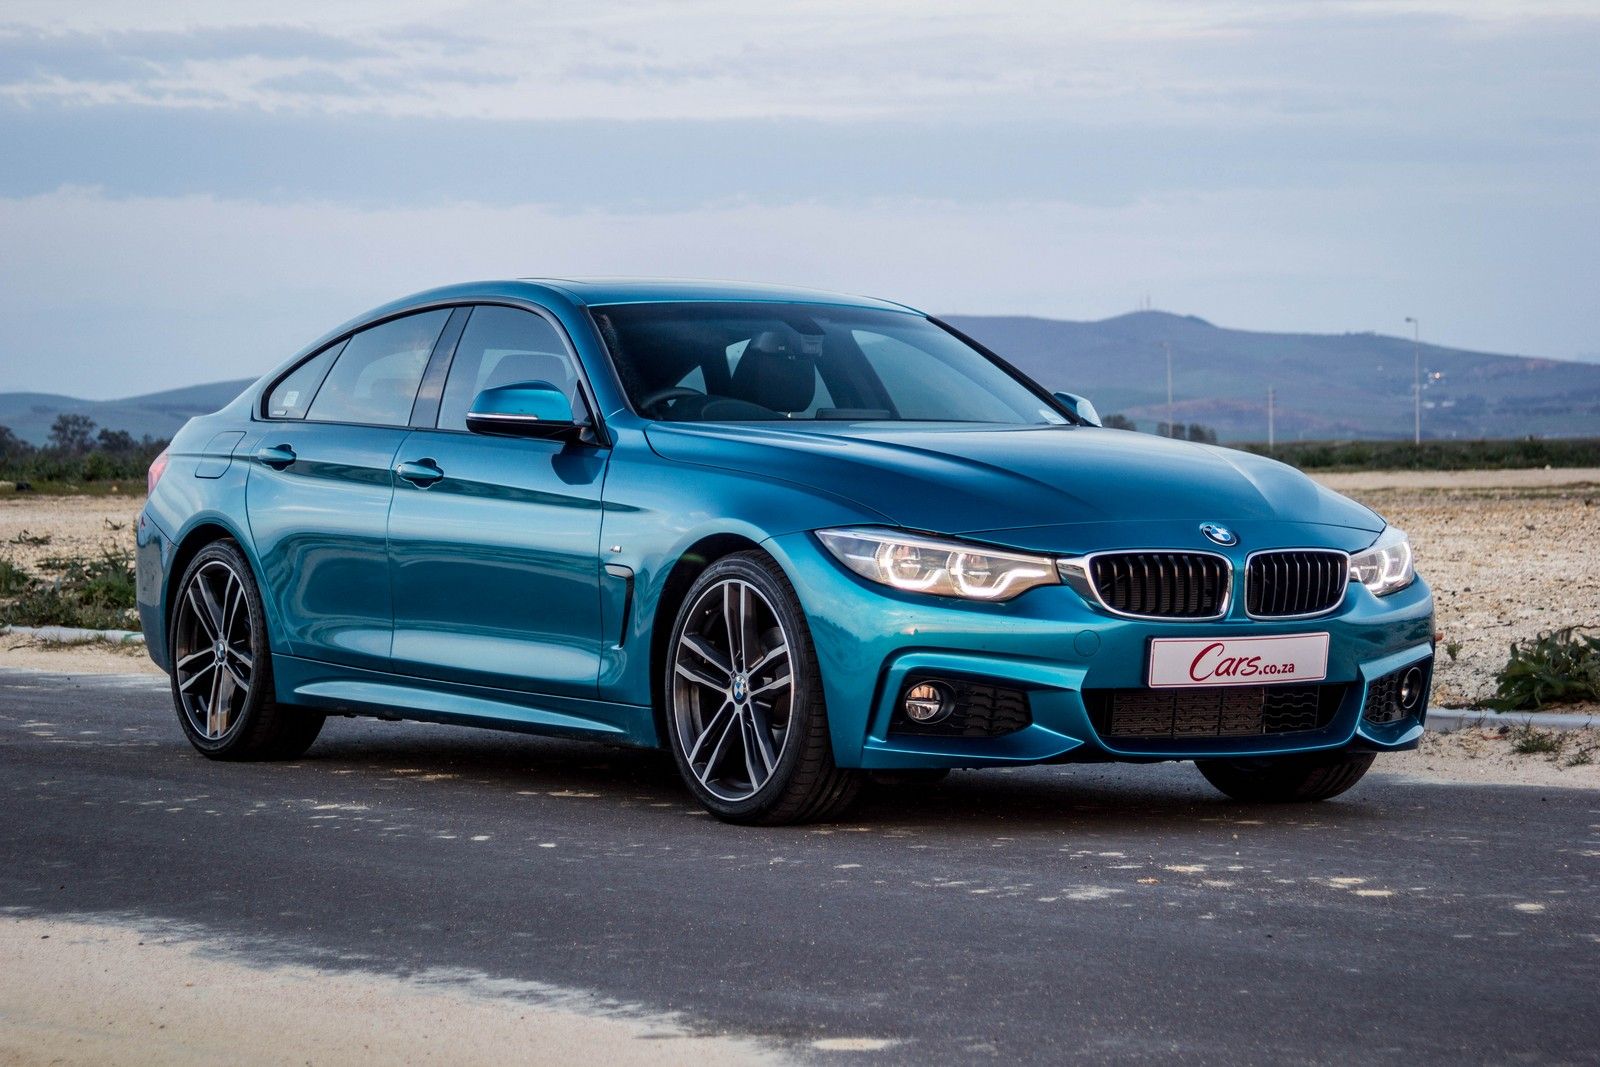 BMW 420i Gran Coupe (2017) Quick Review